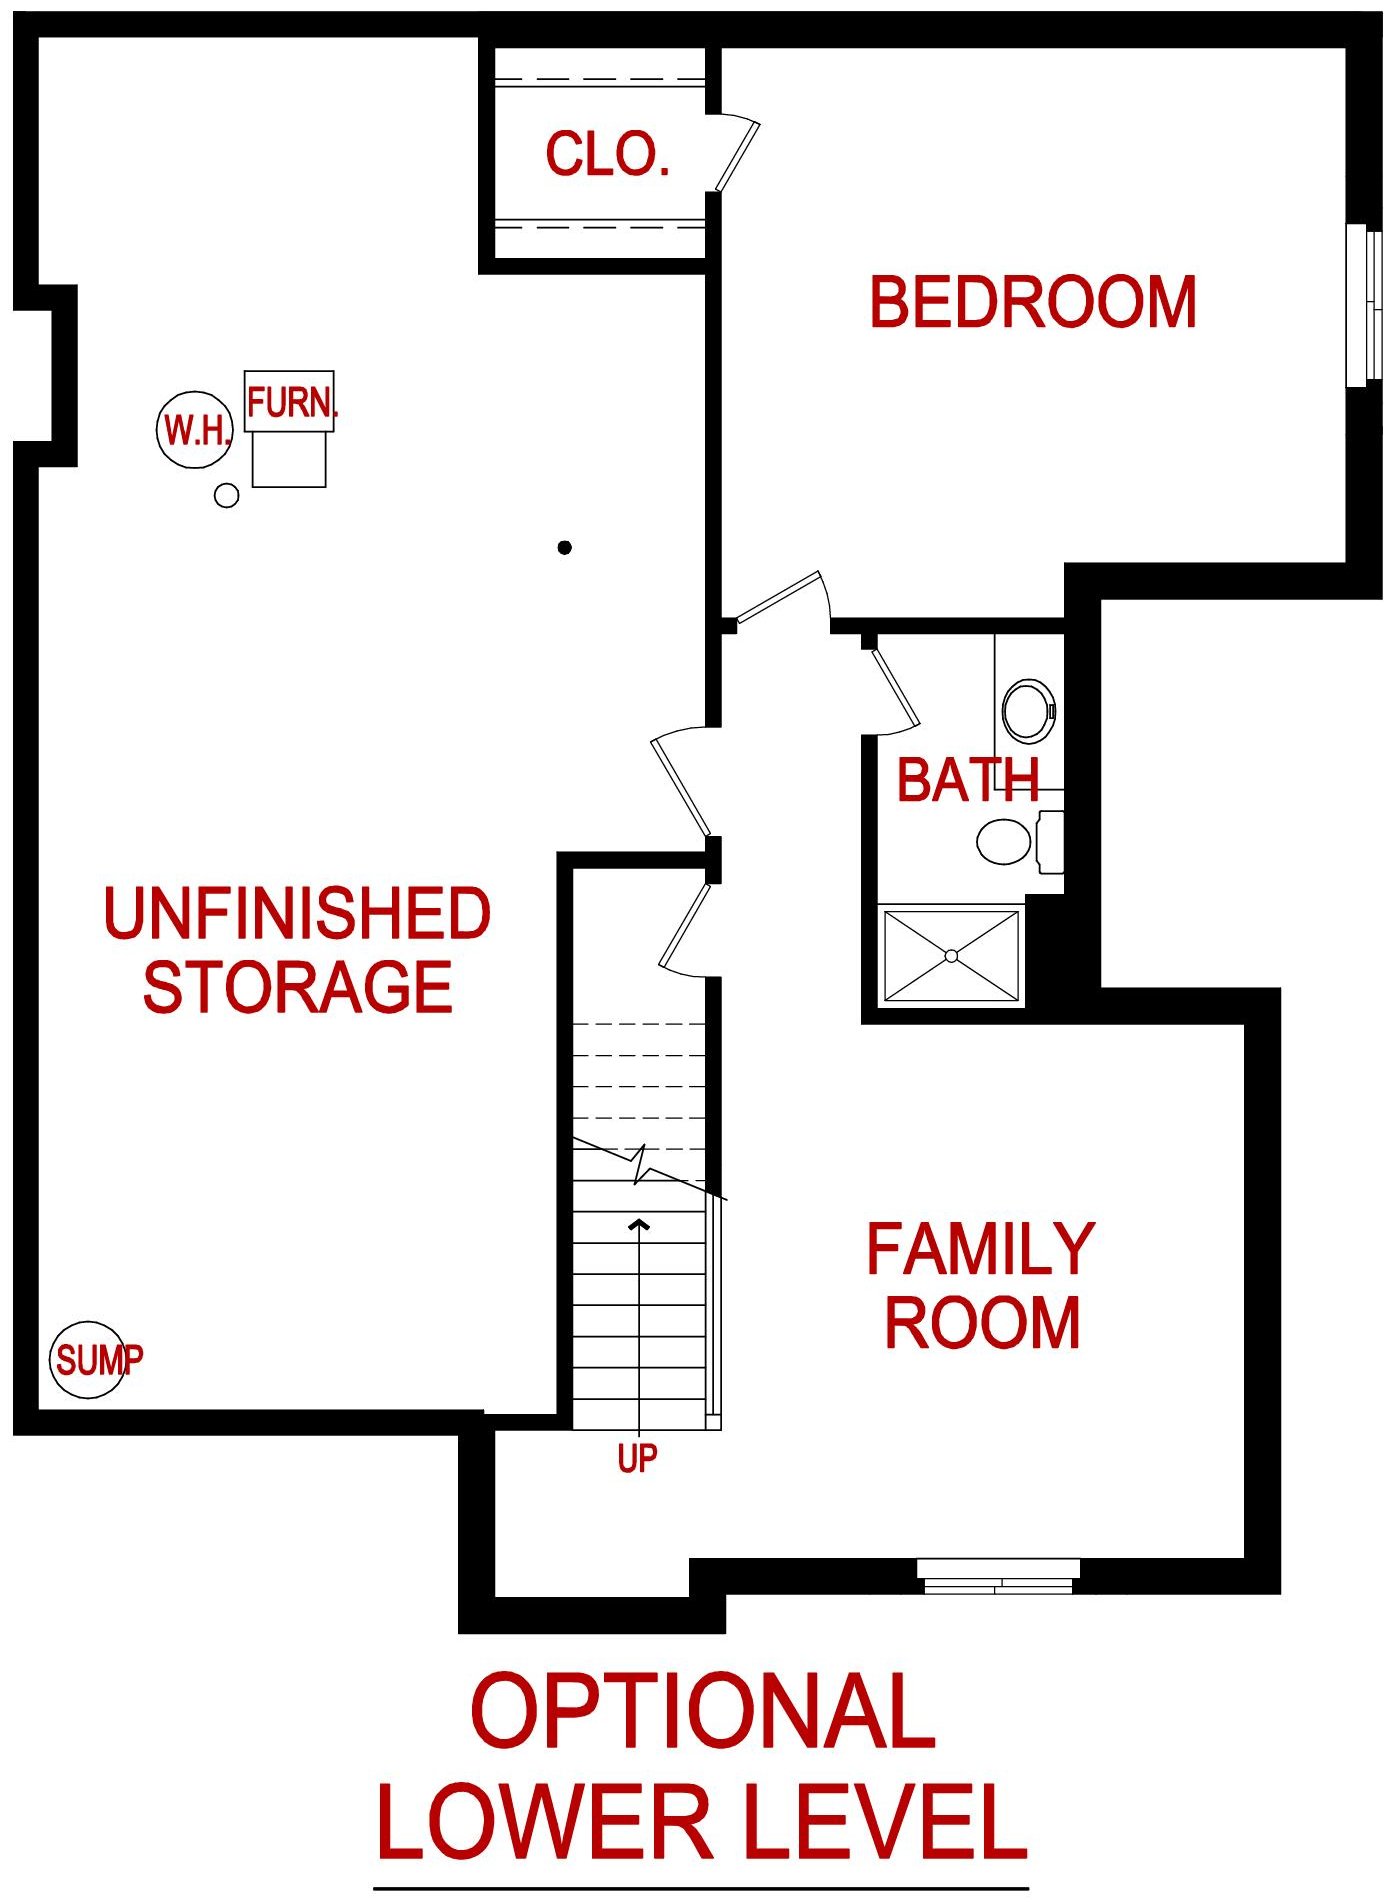 Minor Model Optional Lower level floor plan from lambie homes